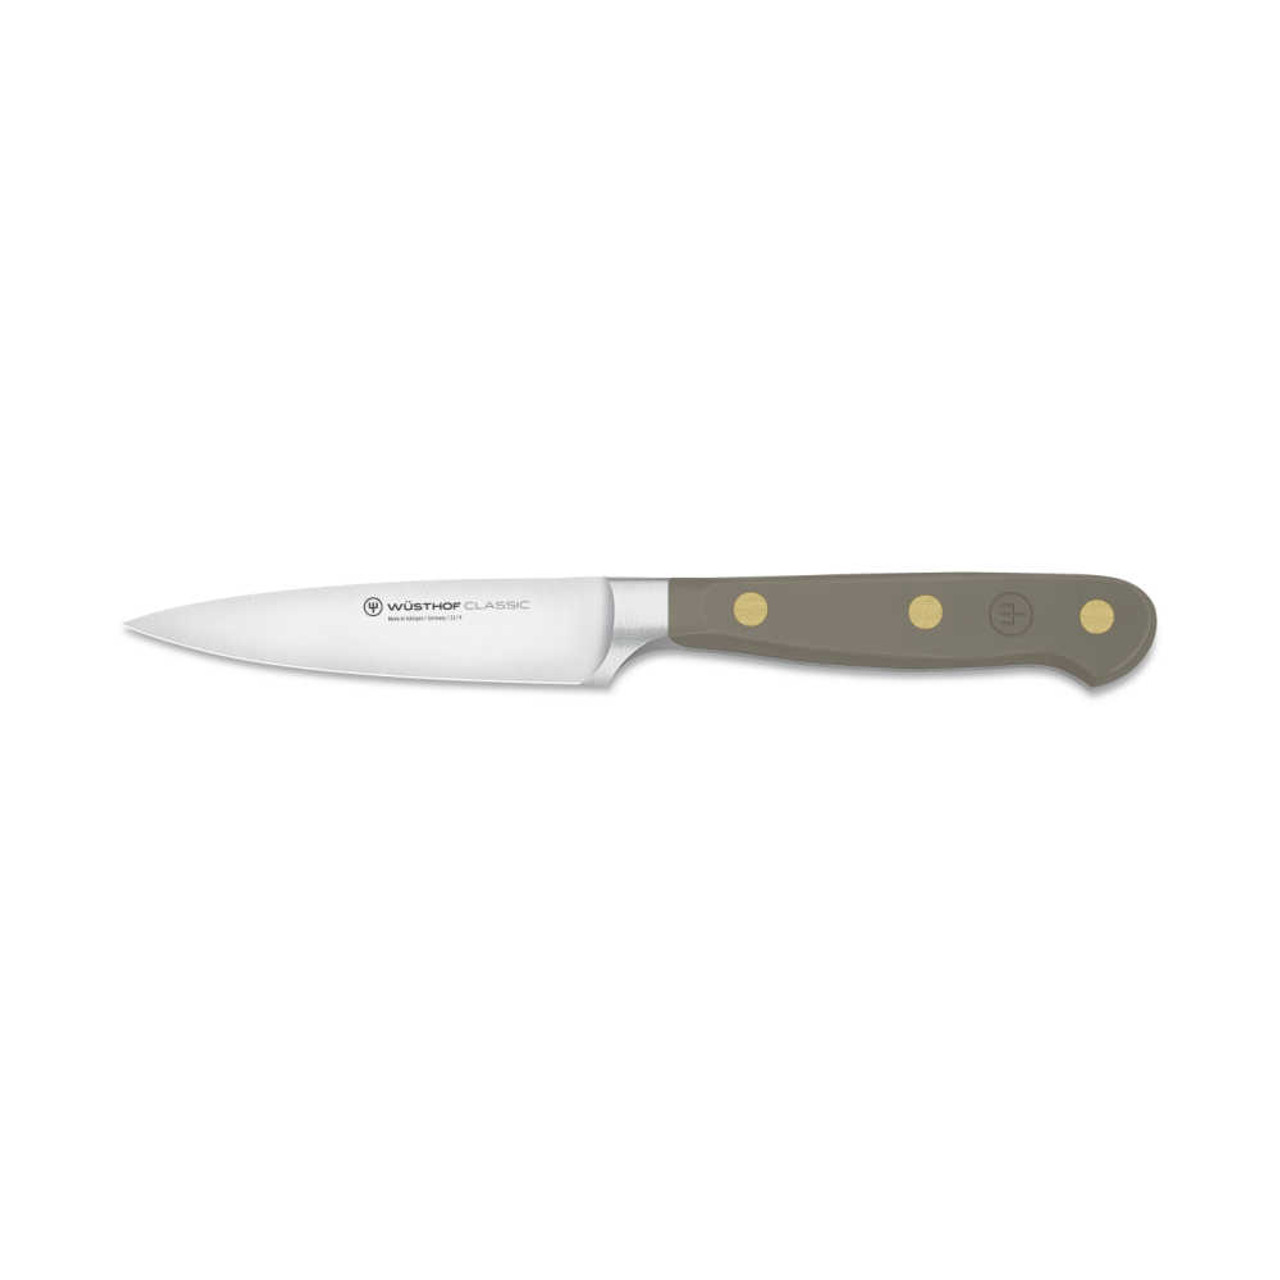 https://cdn11.bigcommerce.com/s-hccytny0od/images/stencil/1280x1280/products/5384/23437/Wusthof_Classic_Color_Paring_Knife_Velvet_Oyster__67173.1682033172.jpg?c=2?imbypass=on